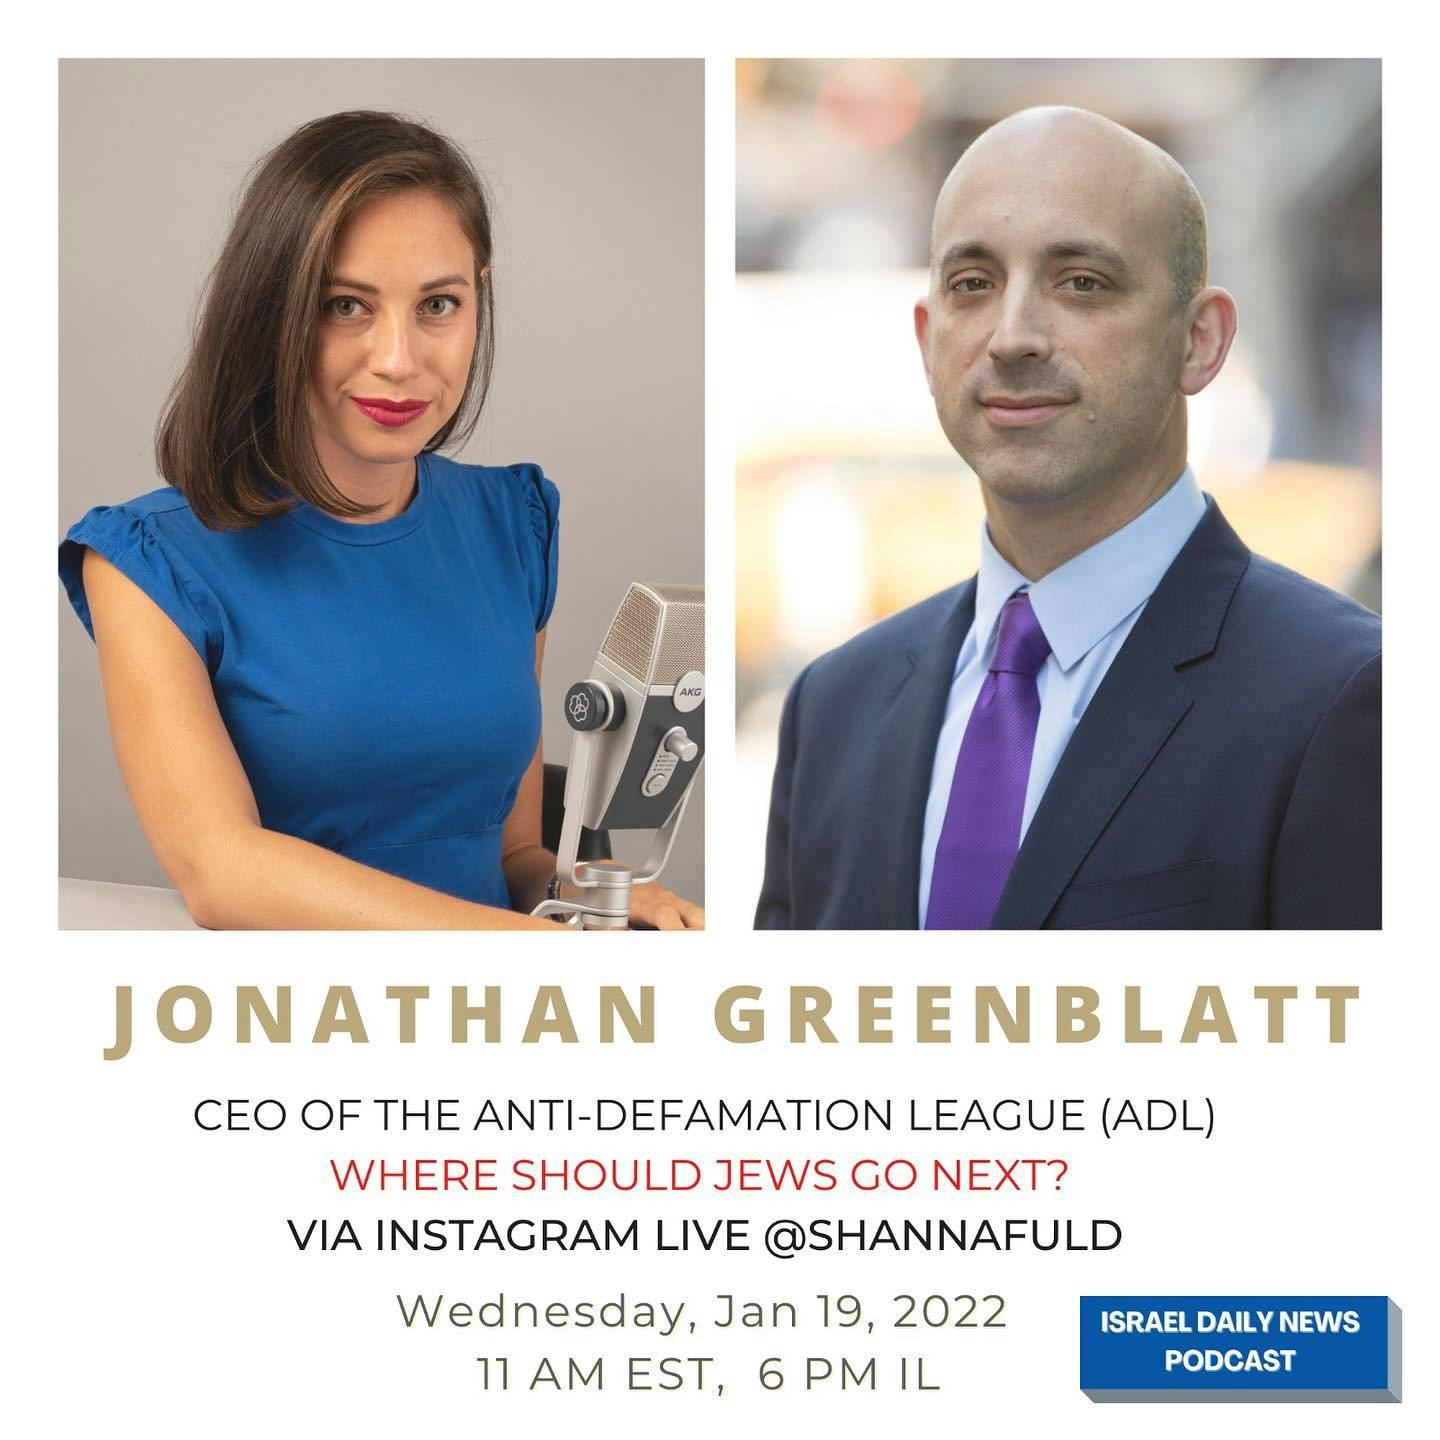 After a synagogue hostage takeover in Texas, @adl_national CEO Jonathan Greenblatt will speak on where Jews should be going next and how to fight antisemitism.

Join us live as I interview Mr. Greenblatt for the Israel Daily News using my personal Instagram page @shannafuld. The Israel Daily News Podcast page was removed from Instagram suddenly and without reason.